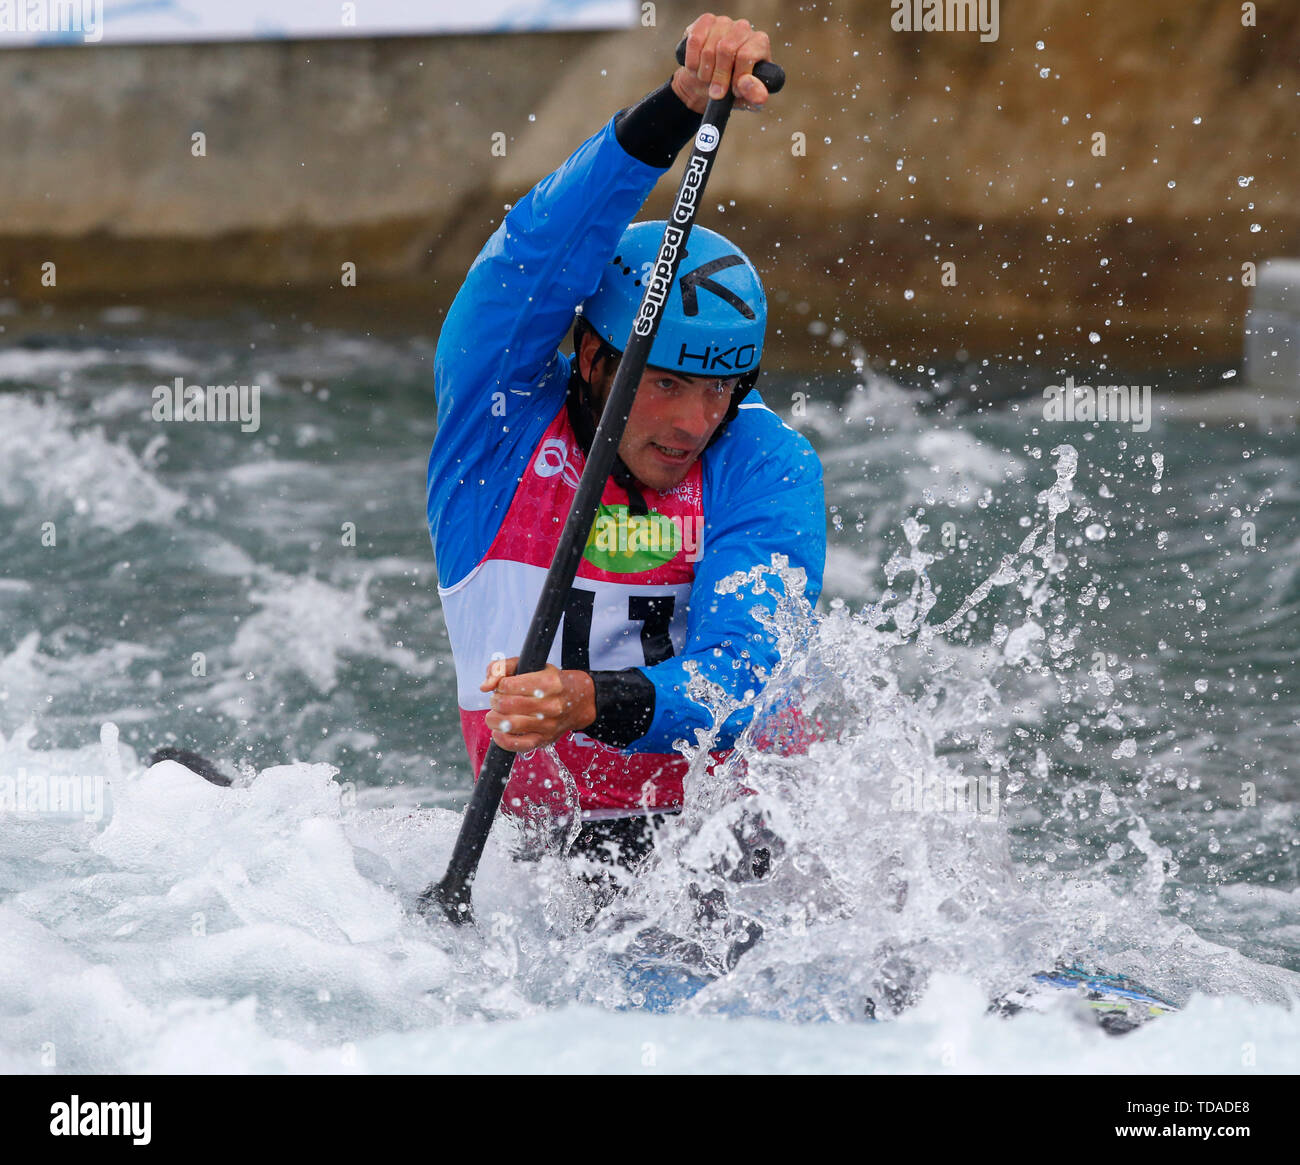 London, UK. 01st Feb, 2018. LONDON, ENGLAND JUNE 14 Lukes Rohan (CZE) Men's C1 1st Heat Run during 2019 ICF Canoe Slalom World Cup 1 at the Lee Valley White Water Centre, London on 14 June 2019 Credit: Action Foto Sport/Alamy Live News Stock Photo